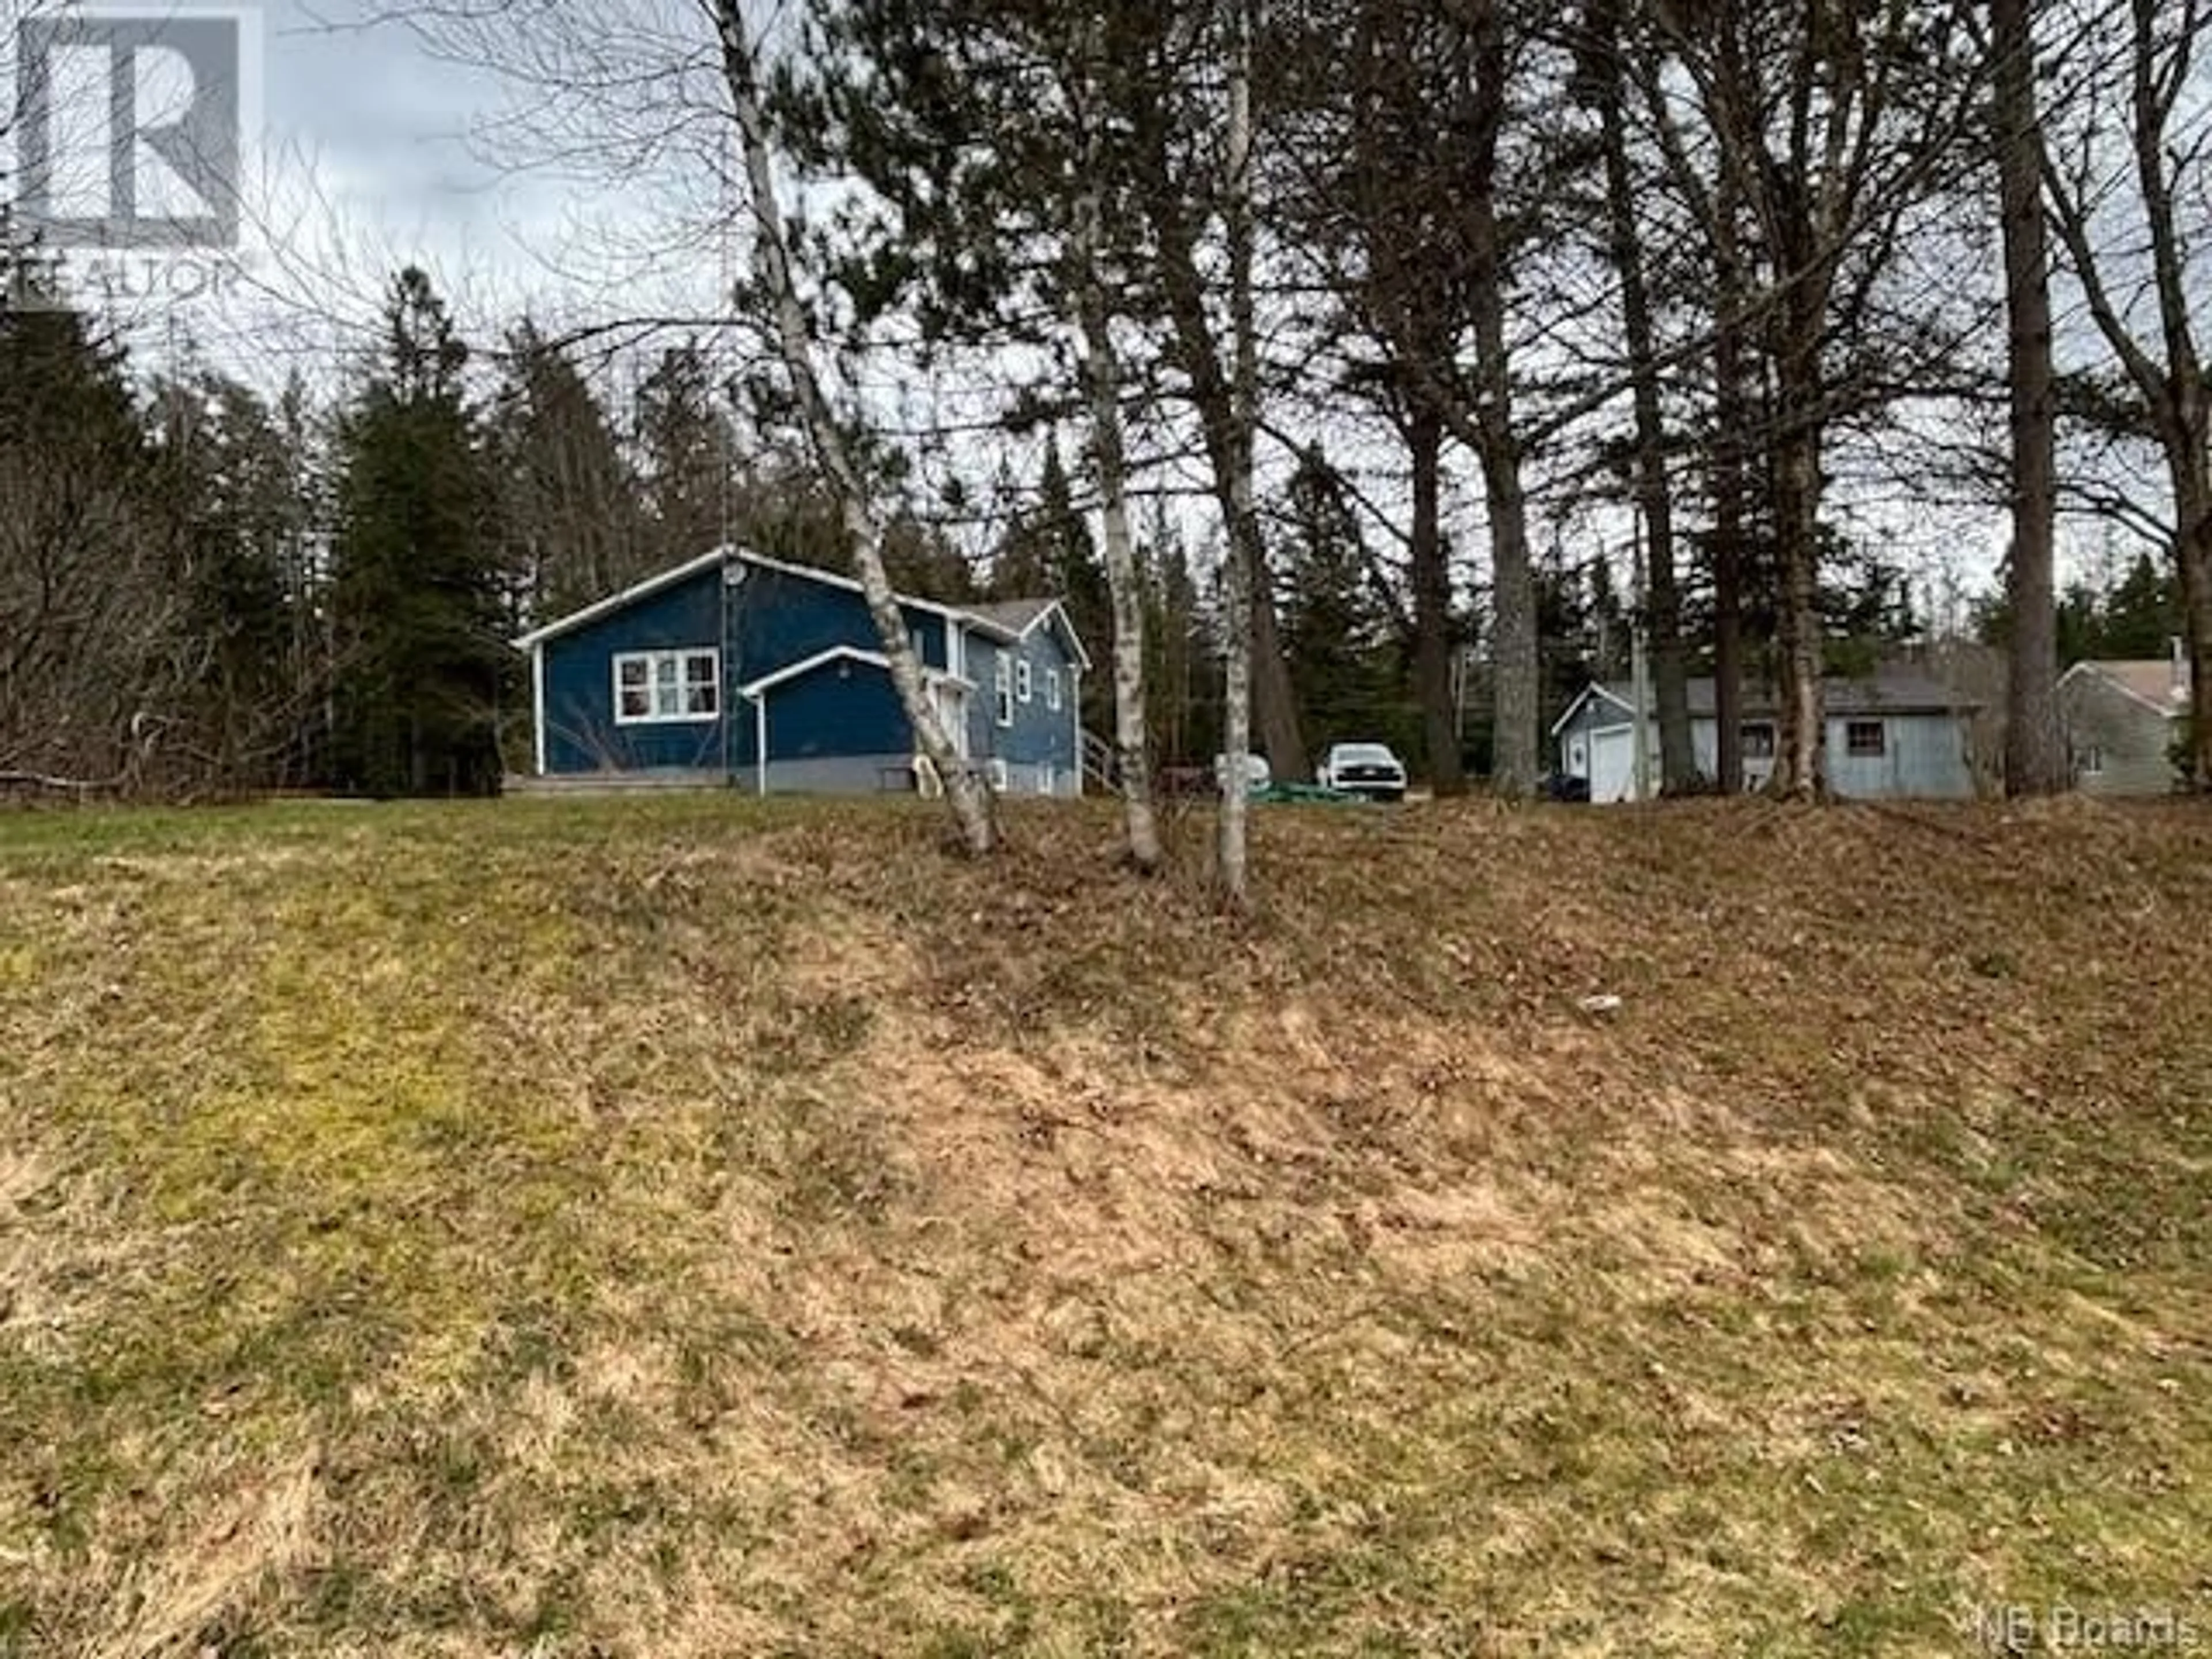 Cottage for 43 Ryan Road, Penobsquis New Brunswick E4G3A3